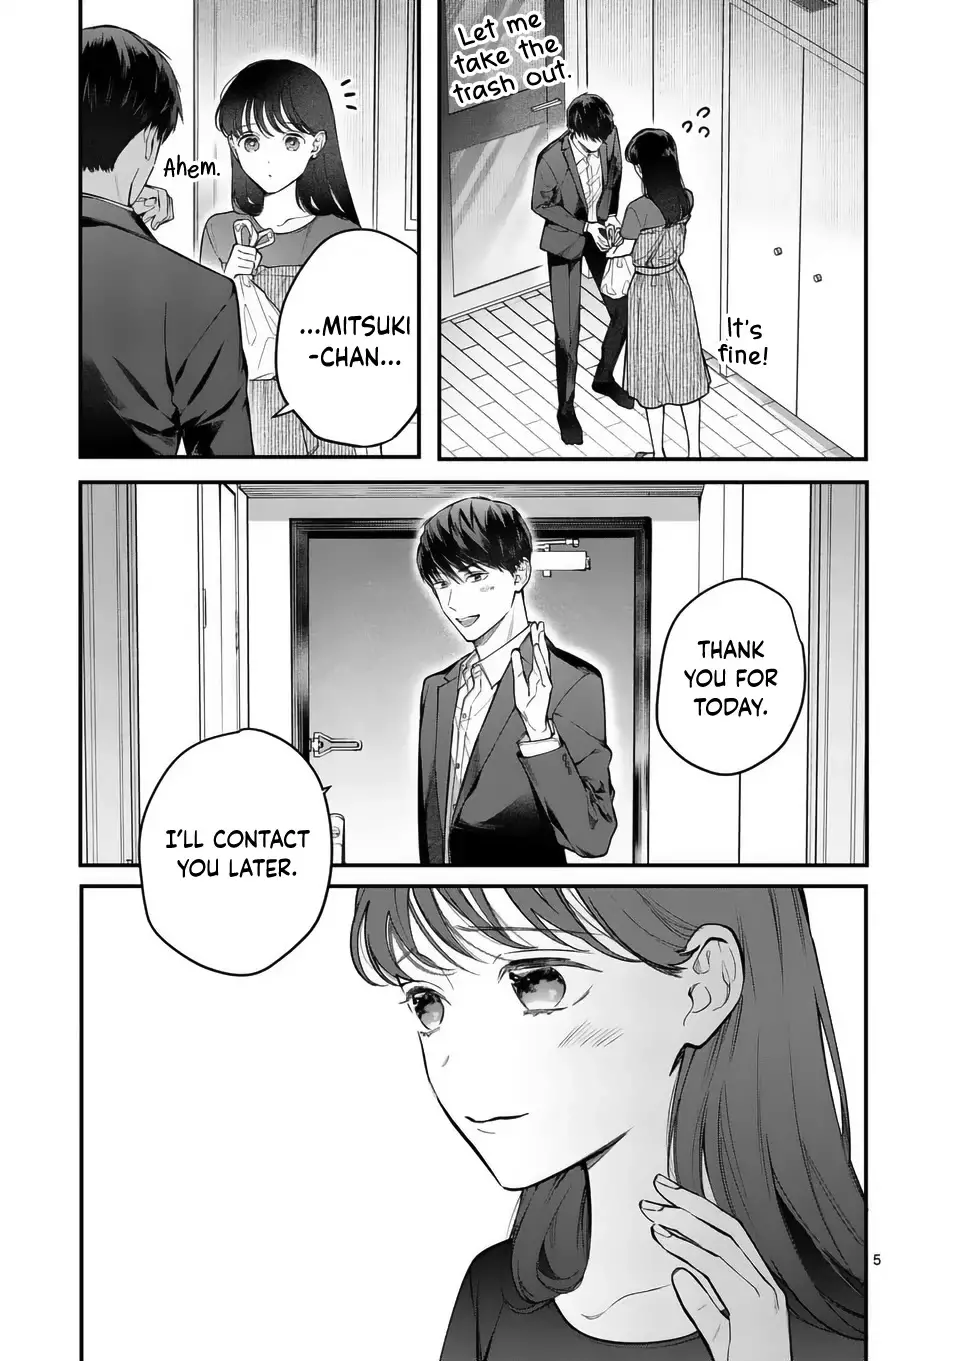 Is It Wrong To Get Done By A Girl? - 8 page 6